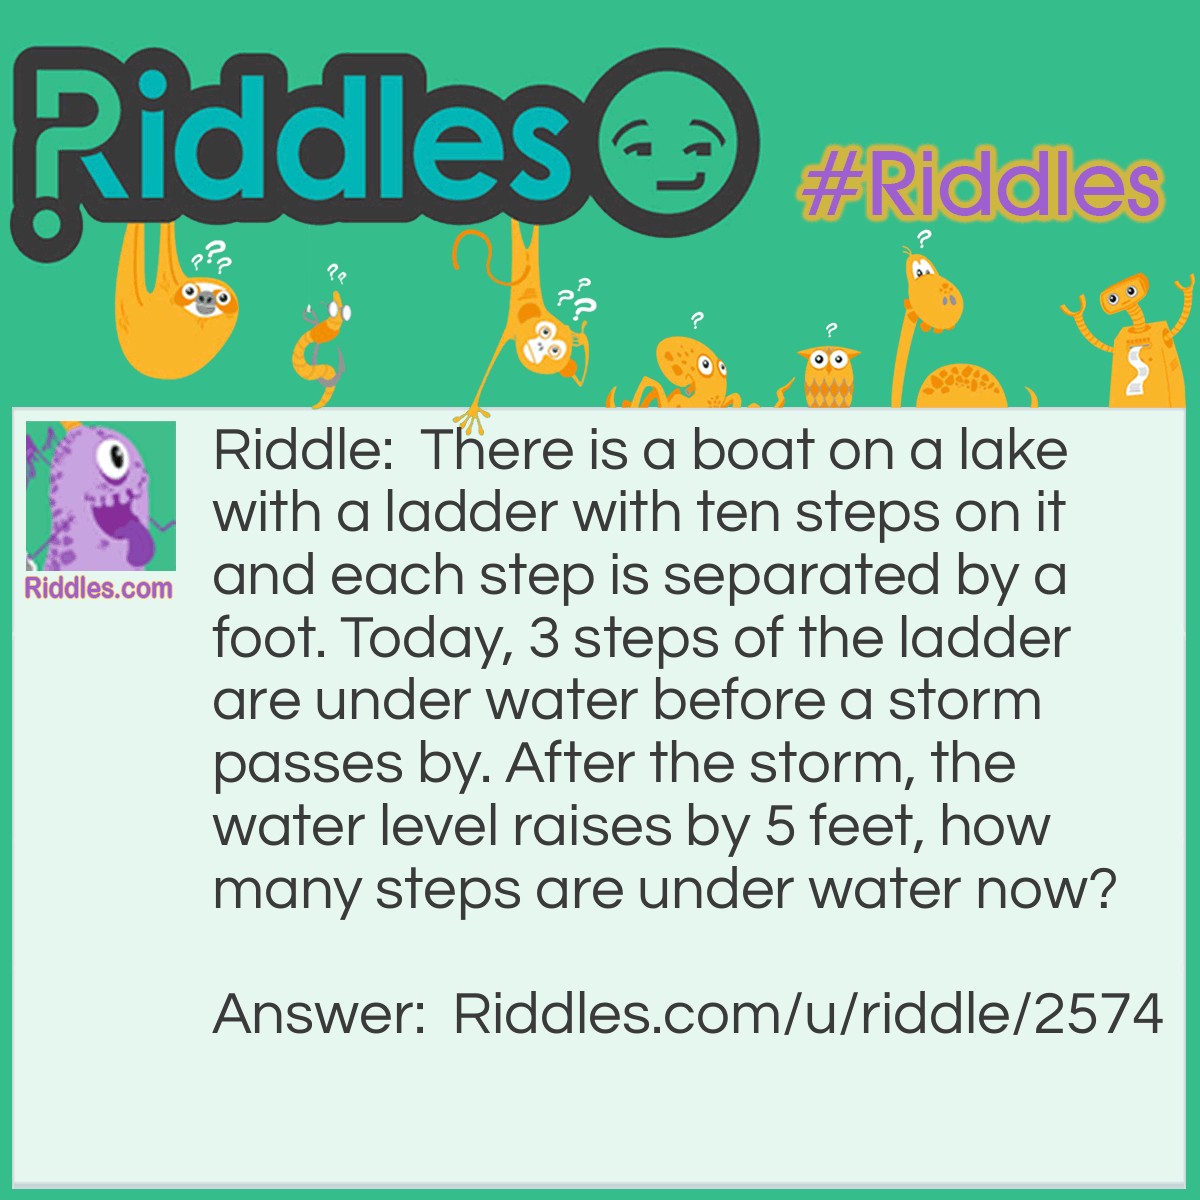 Riddle: There is a boat on a lake with a ladder with ten steps on it and each step is separated by a foot. Today, 3 steps of the ladder are under water before a storm passes by. After the storm, the water level raises by 5 feet, how many steps are under water now? Answer: There is still 3 steps under water because the boat floats on water.